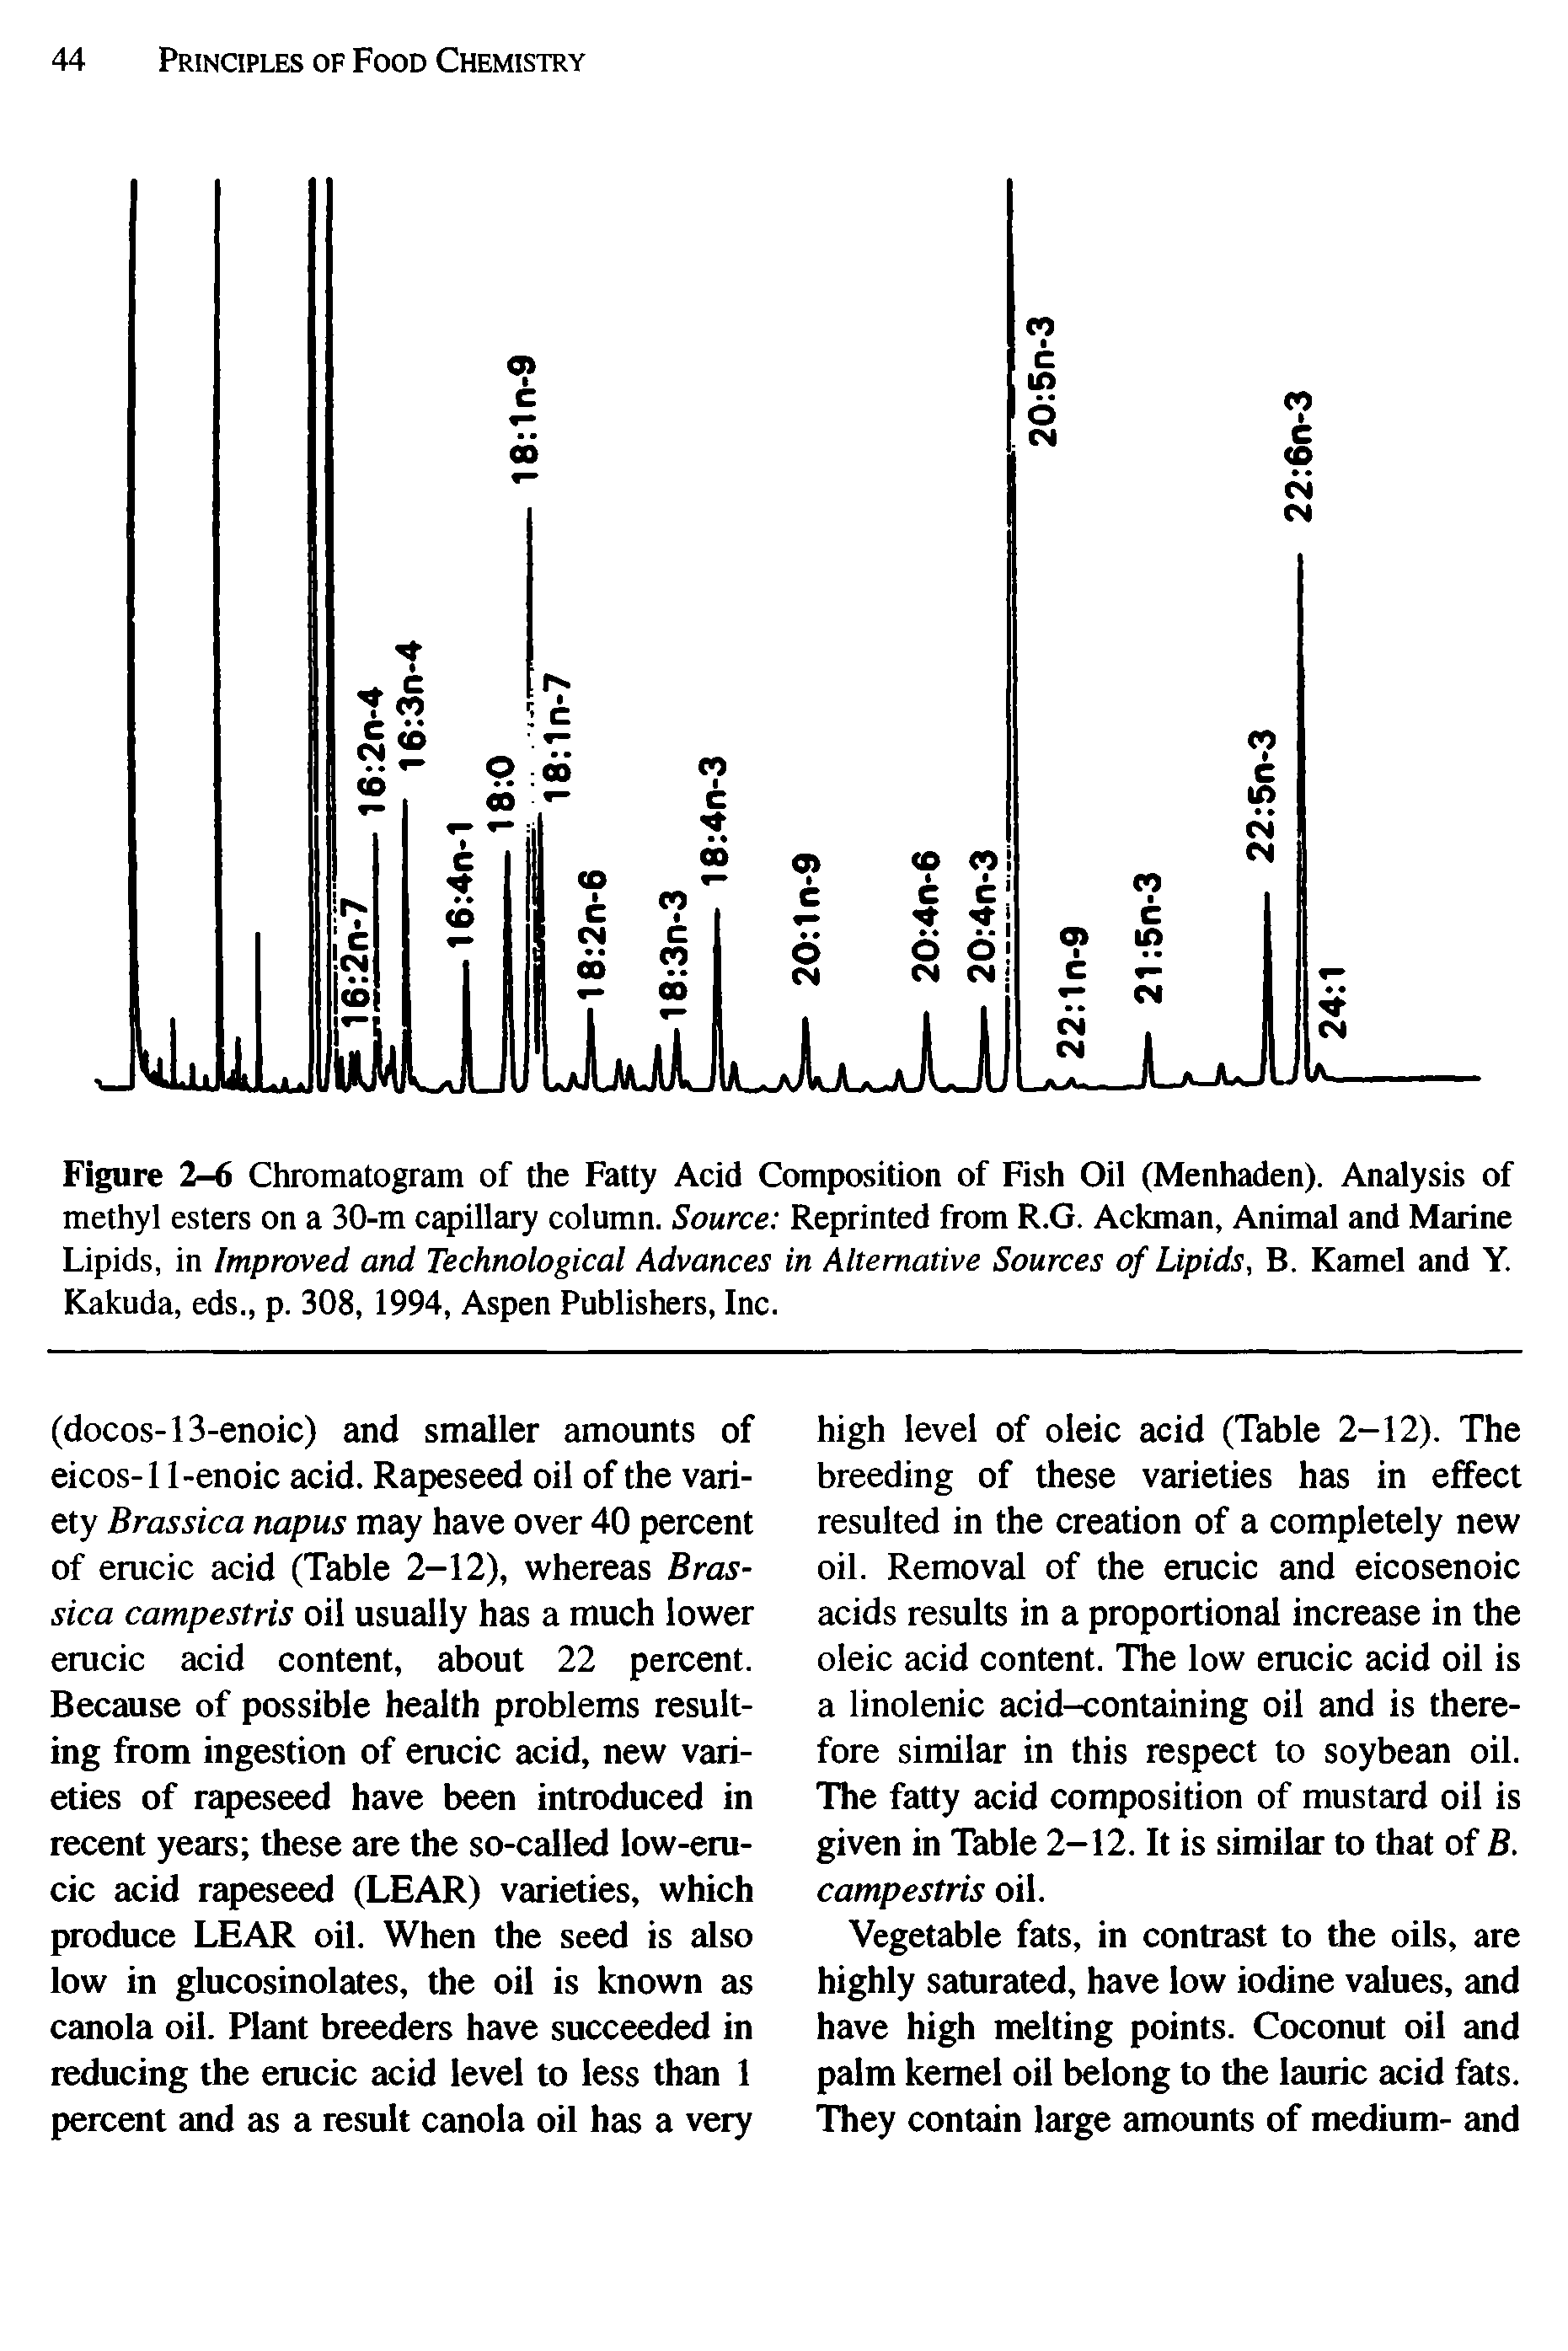 Figure 2-6 Chromatogram of the Fatty Acid Composition of Fish Oil (Menhaden). Analysis of methyl esters on a 30-m capillary column. Source Reprinted from R.G. Ackman, Animal and Marine Lipids, in Improved and Technological Advances in Alternative Sources of Lipids, B. Kamel and Y. Kakuda, eds., p. 308, 1994, Aspen Publishers, Inc.